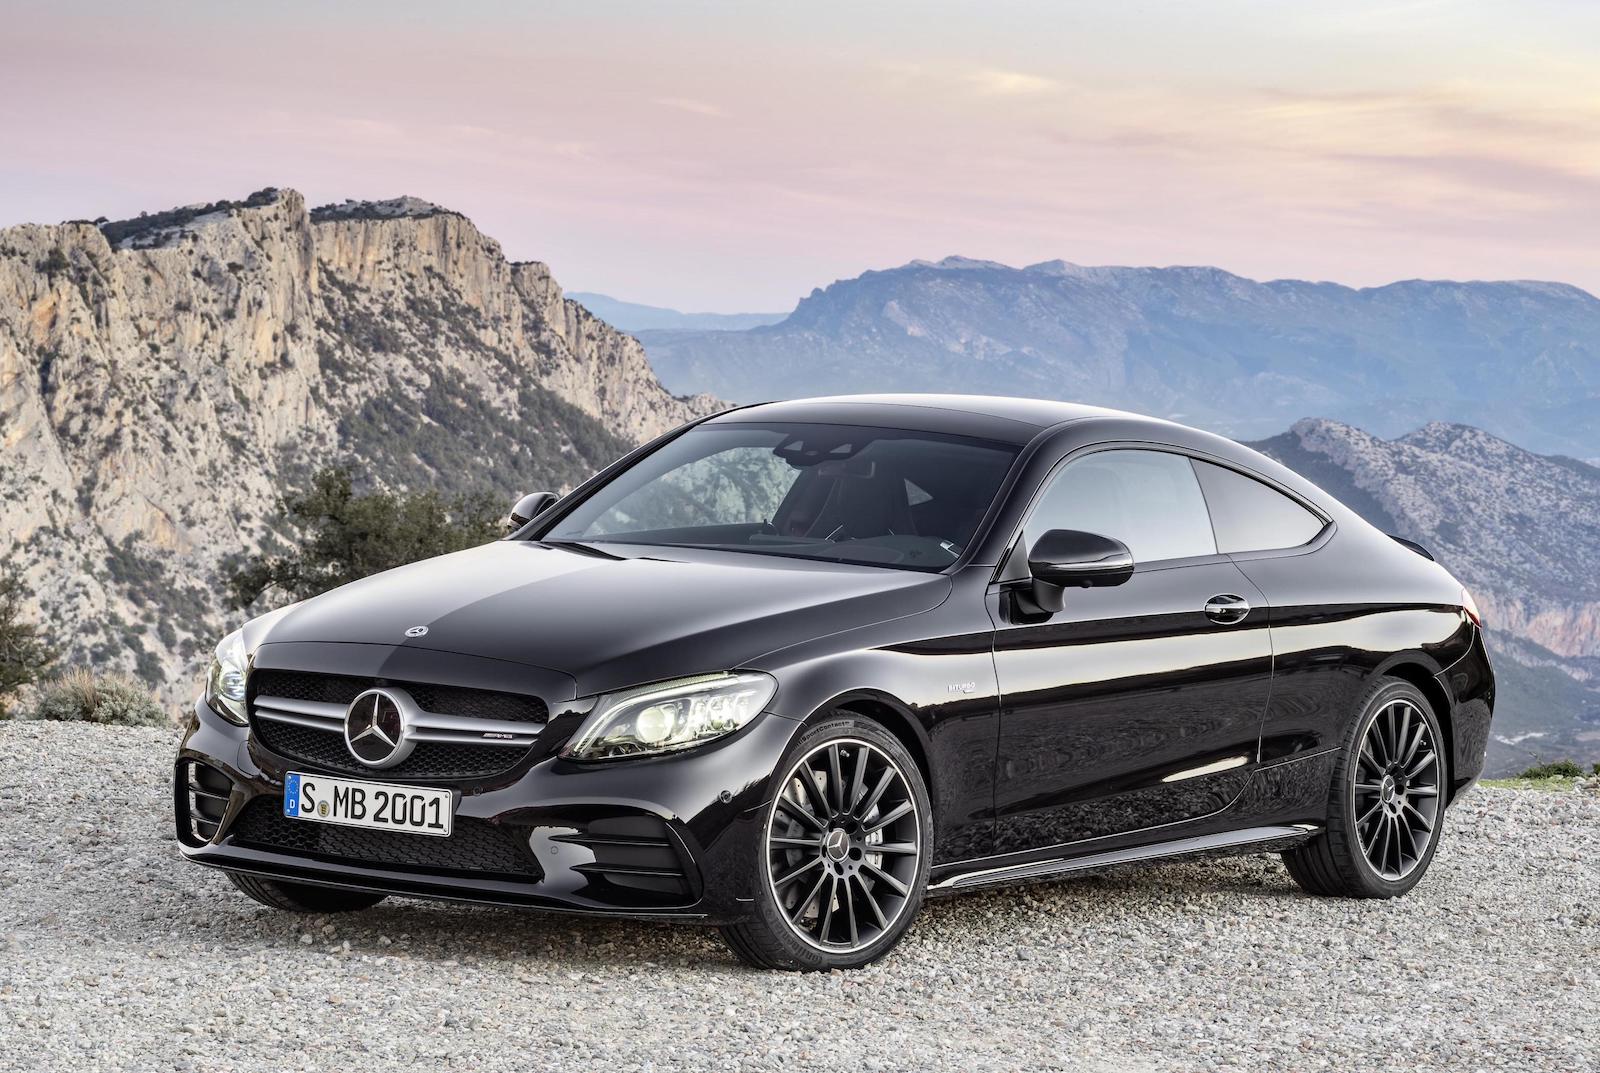 2018 Mercedes-AMG C 43 coupe & carbio get power boost